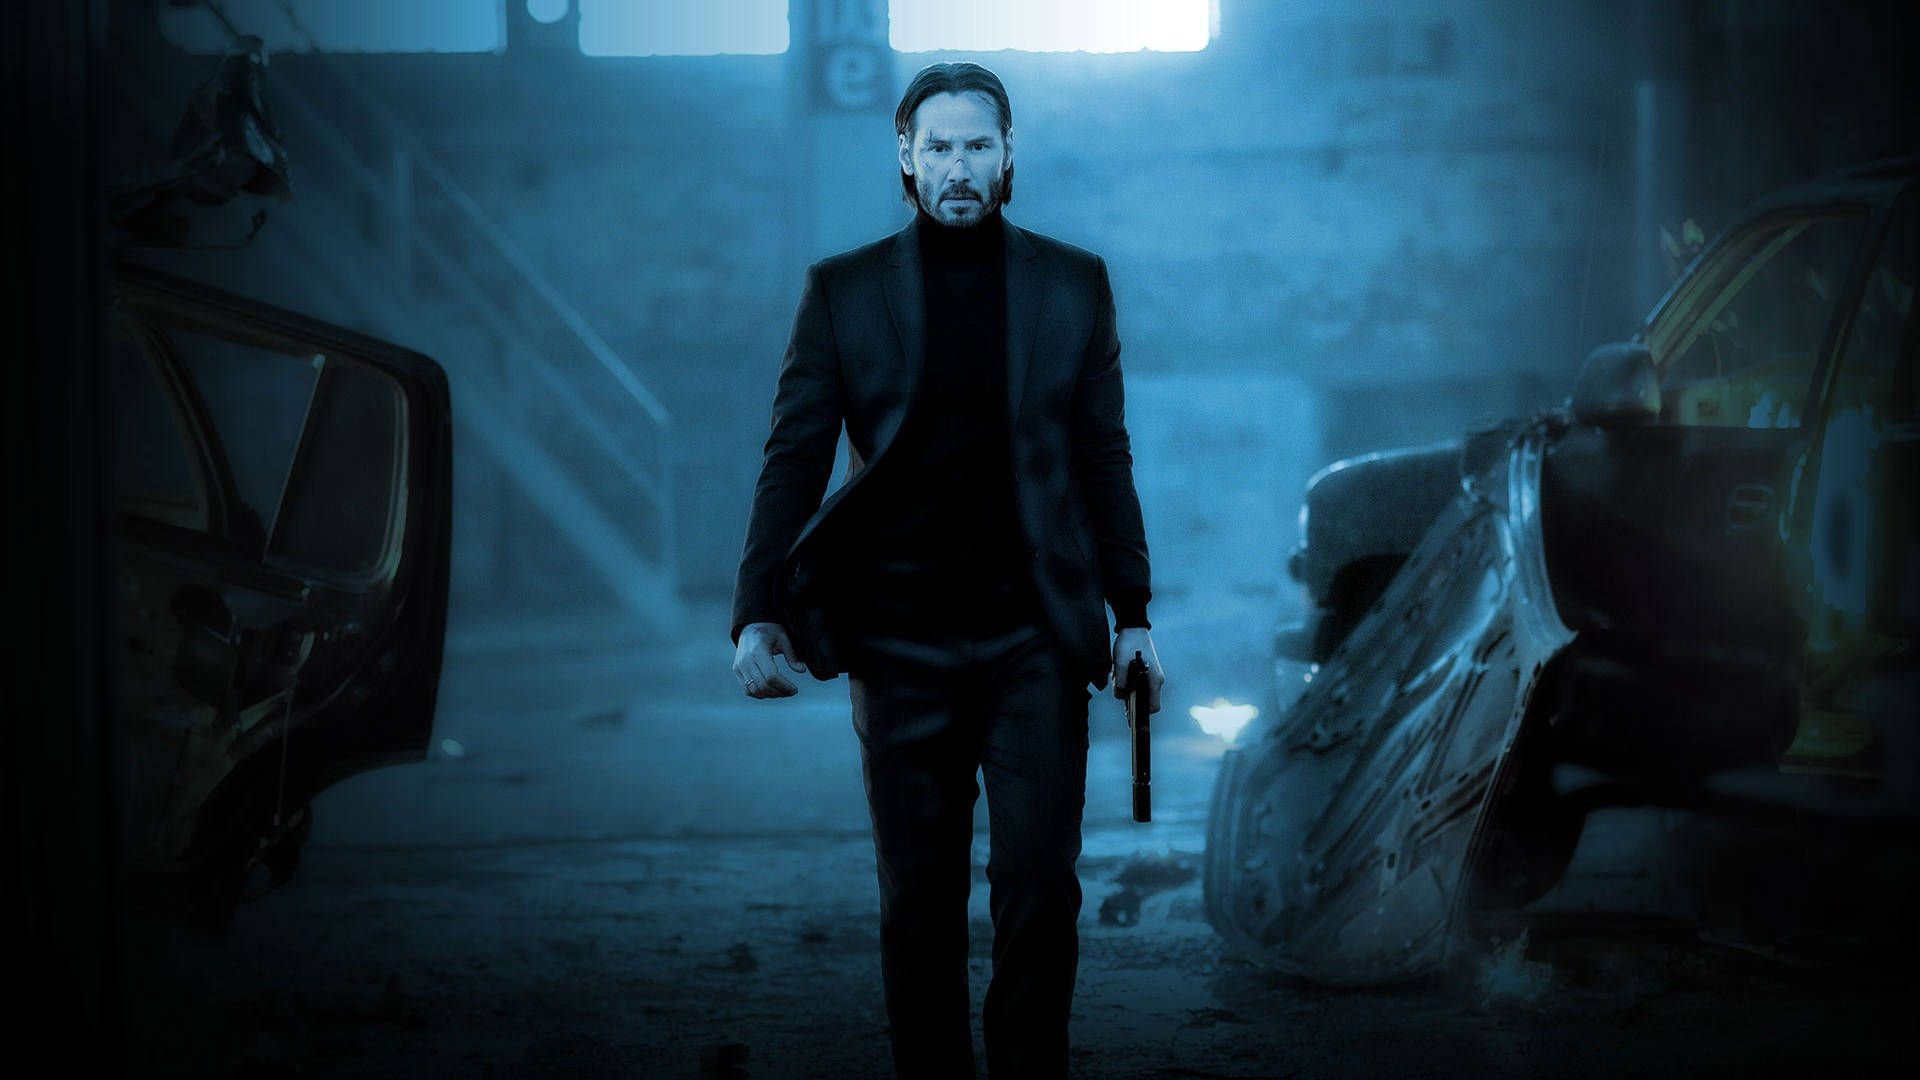 John Wick: Chapter 3 - Parabellum is a 2019 American action film directed by Chad Stahelski. - John Wick